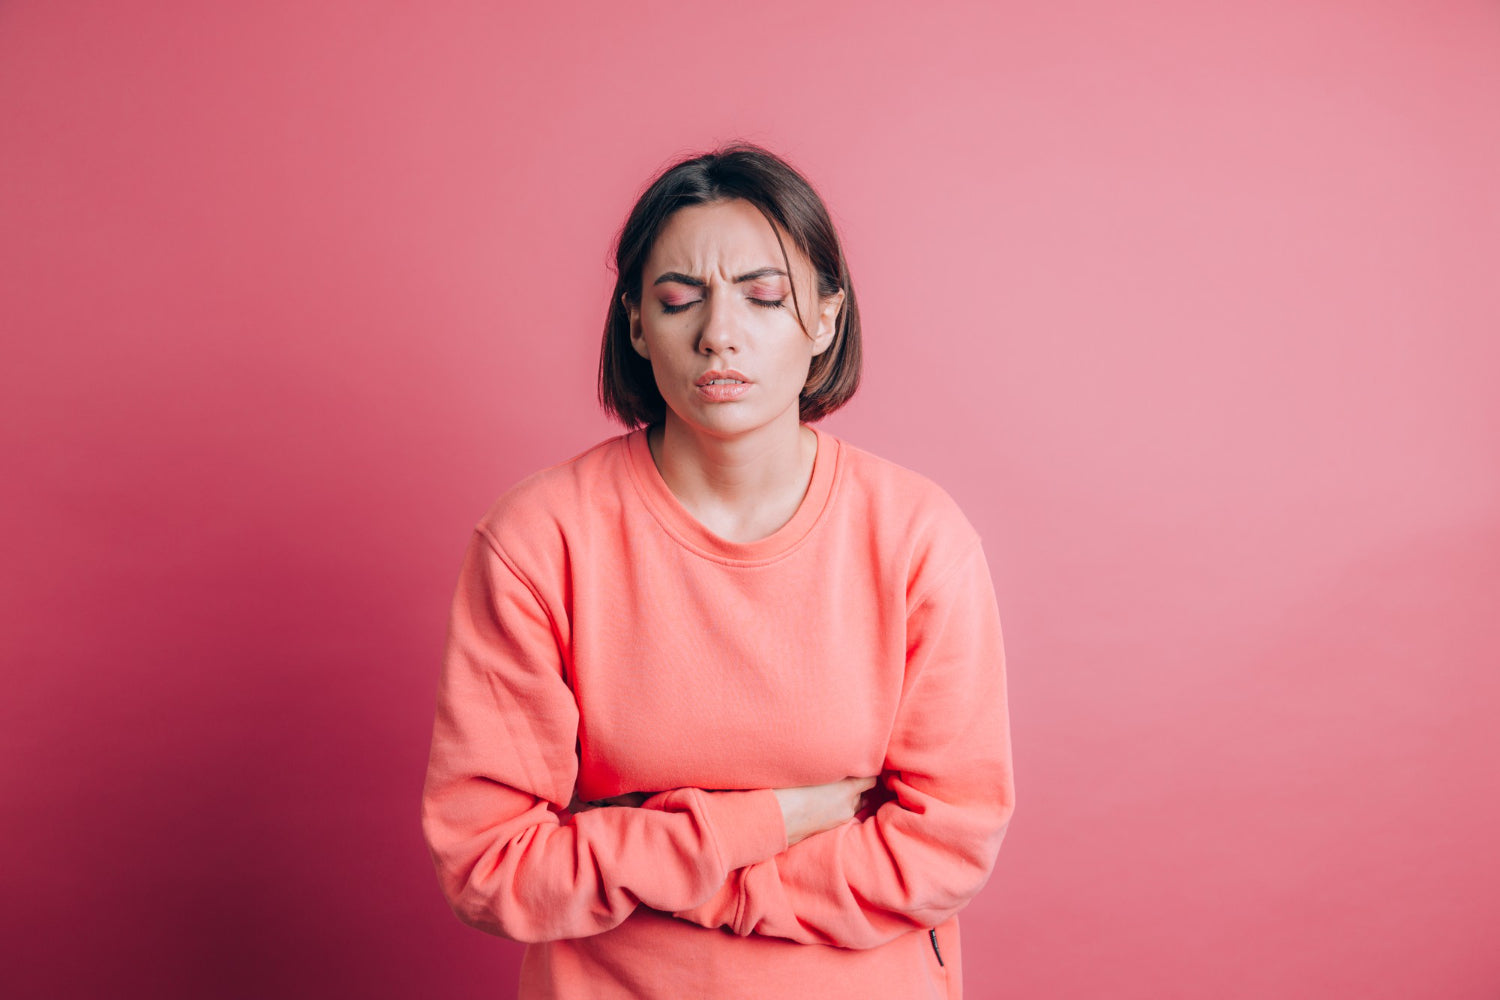 Image of a woman wearing a peach sweater against a pink wall suffering from stomach ache and constipation with painful grimace. 